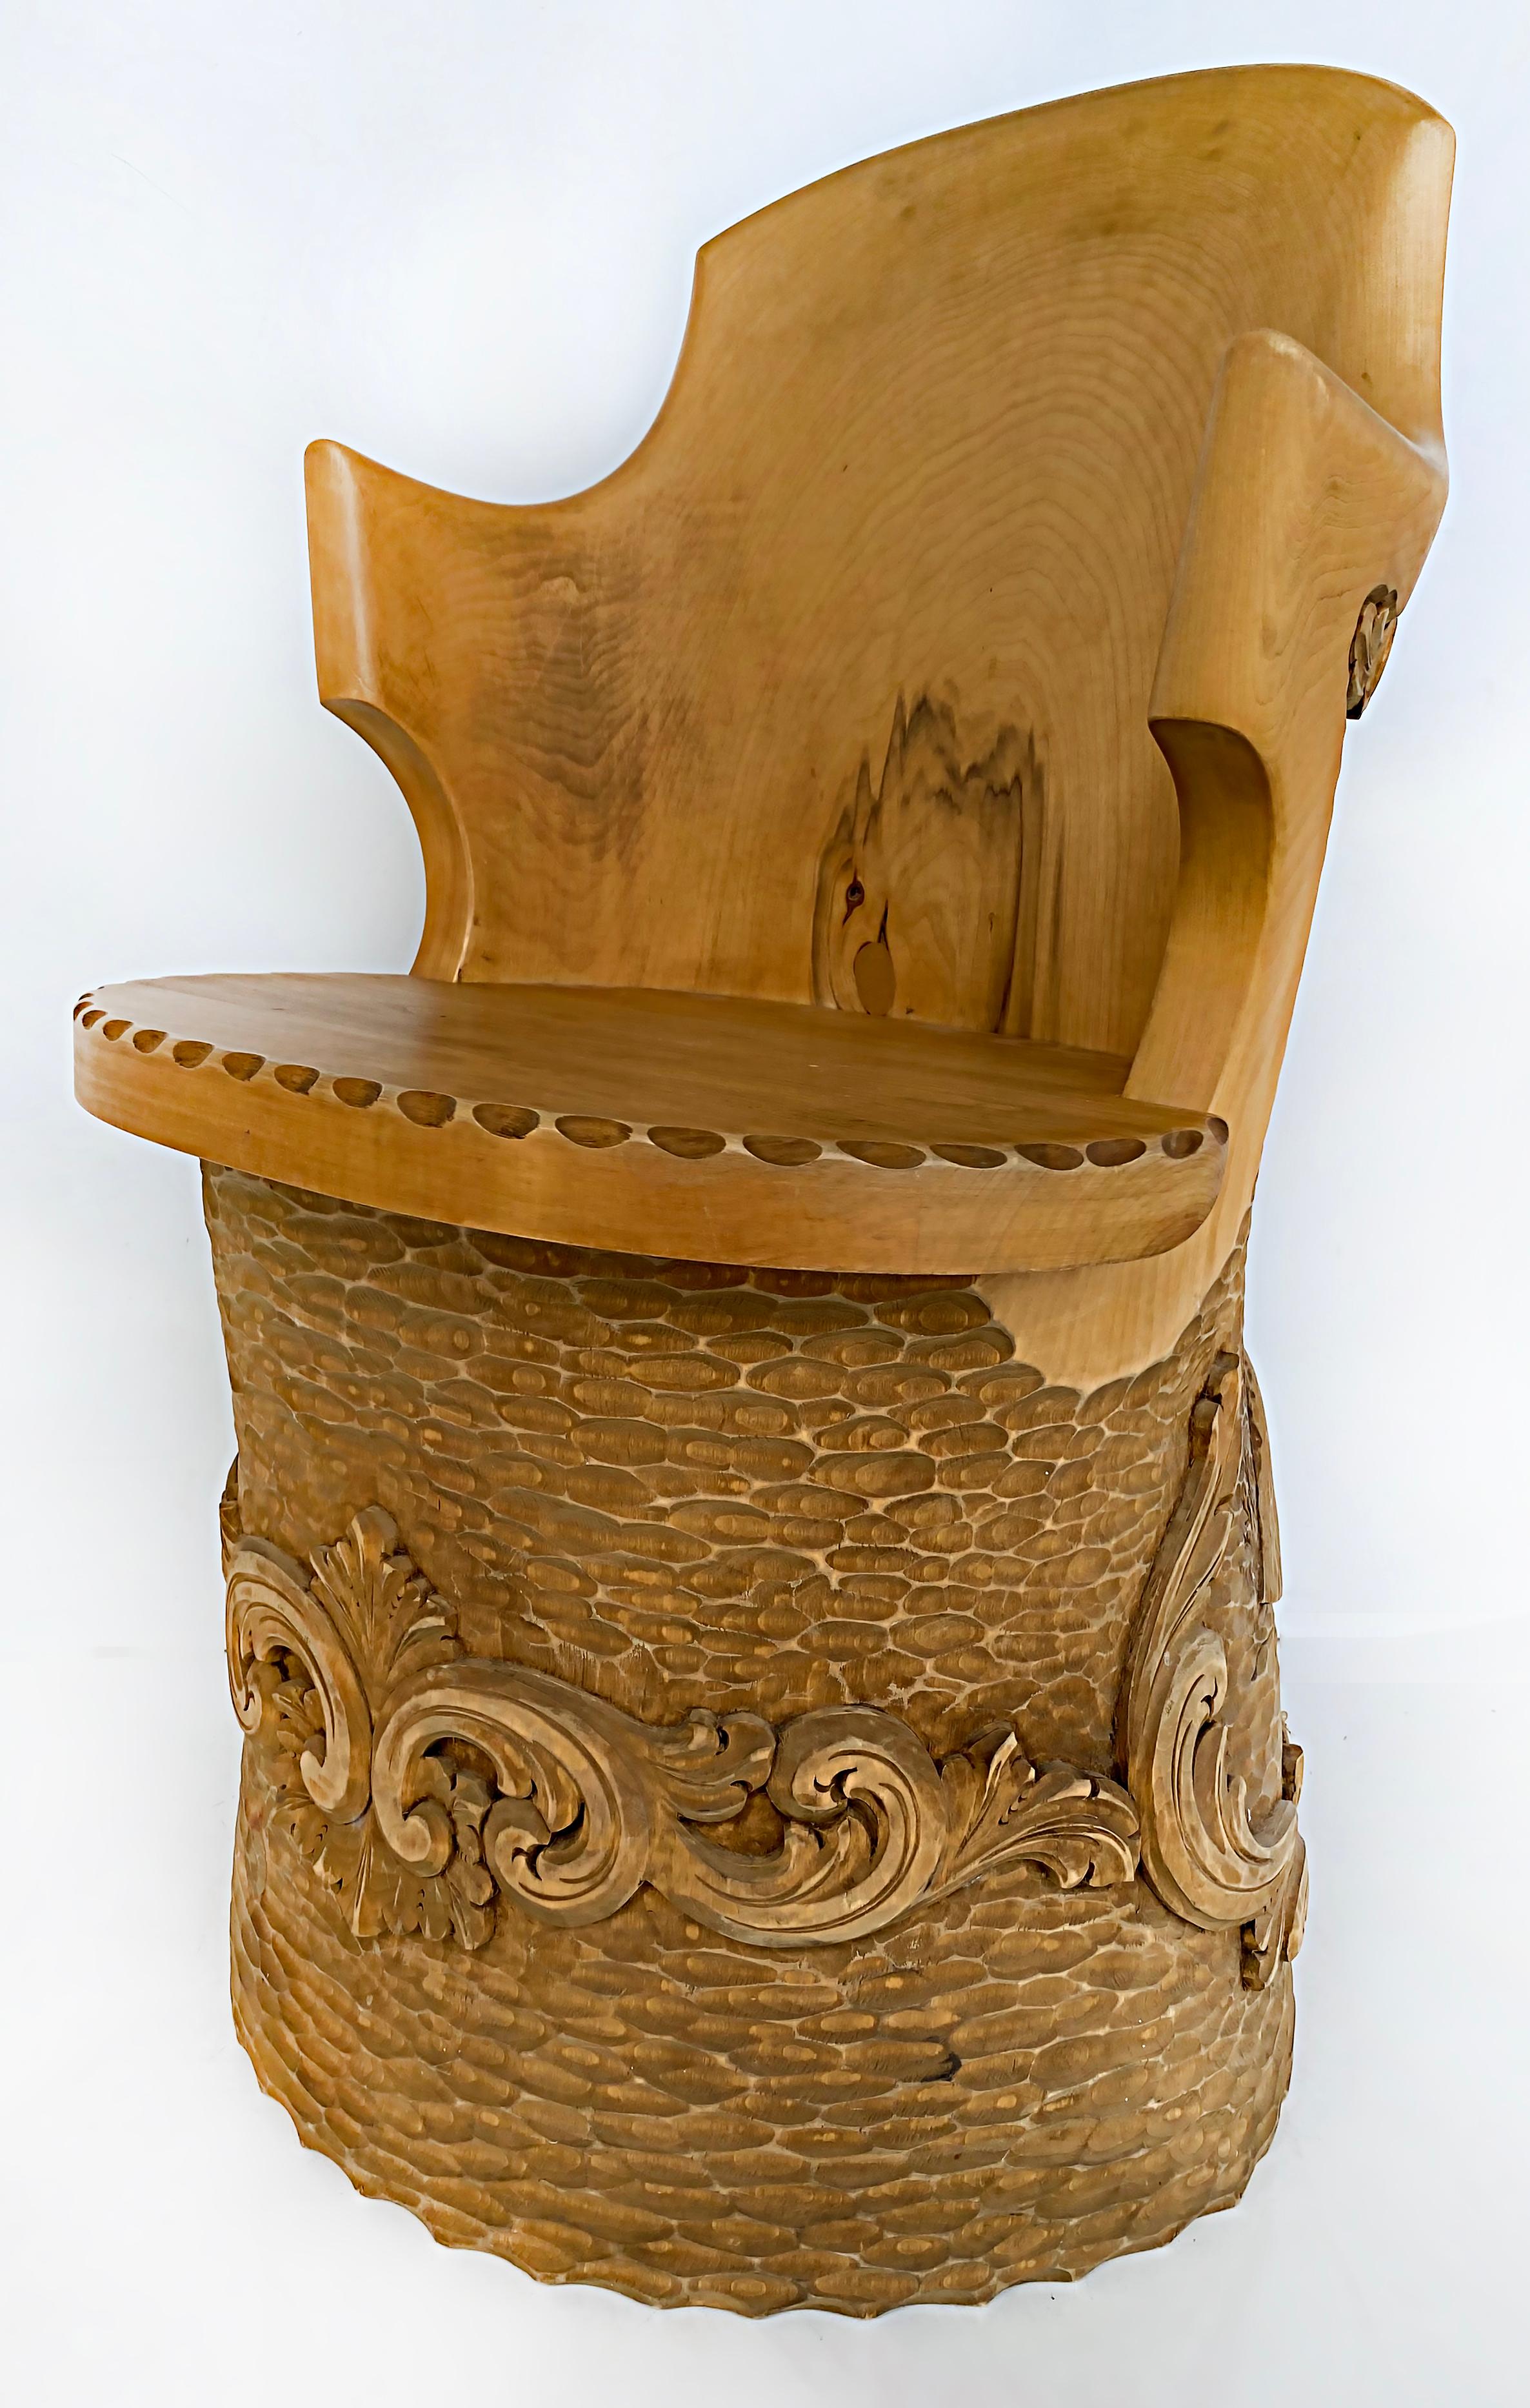 Wood Norwegian Carved Kubbestol Chairs Hand-Carved Tree Trunks with Birds and Turkey For Sale